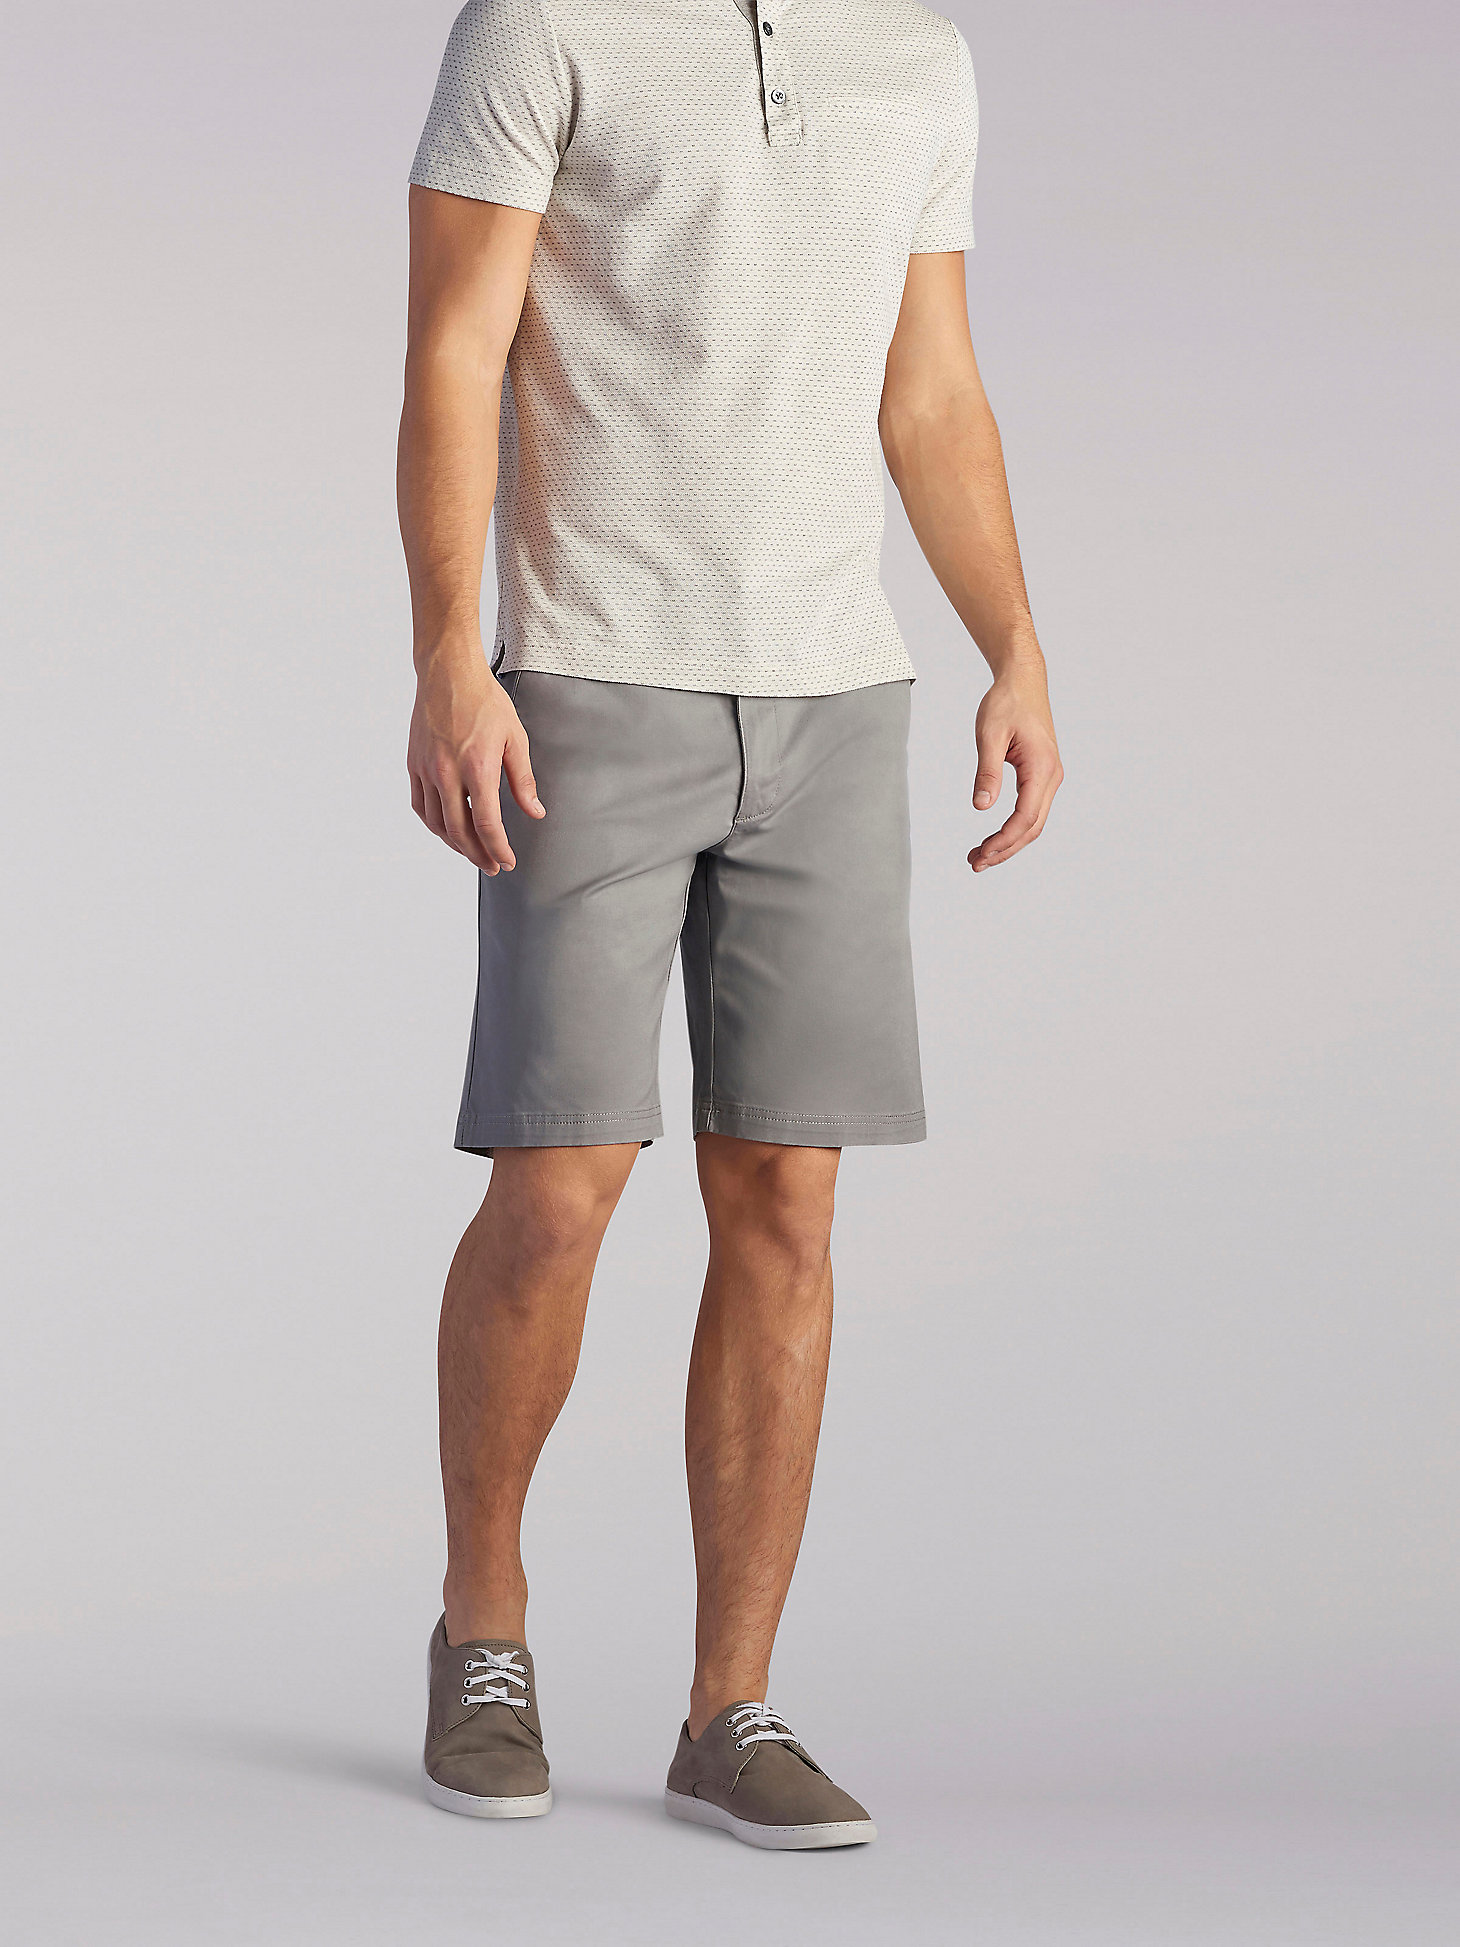 Men's Extreme Motion Short in Iron main view